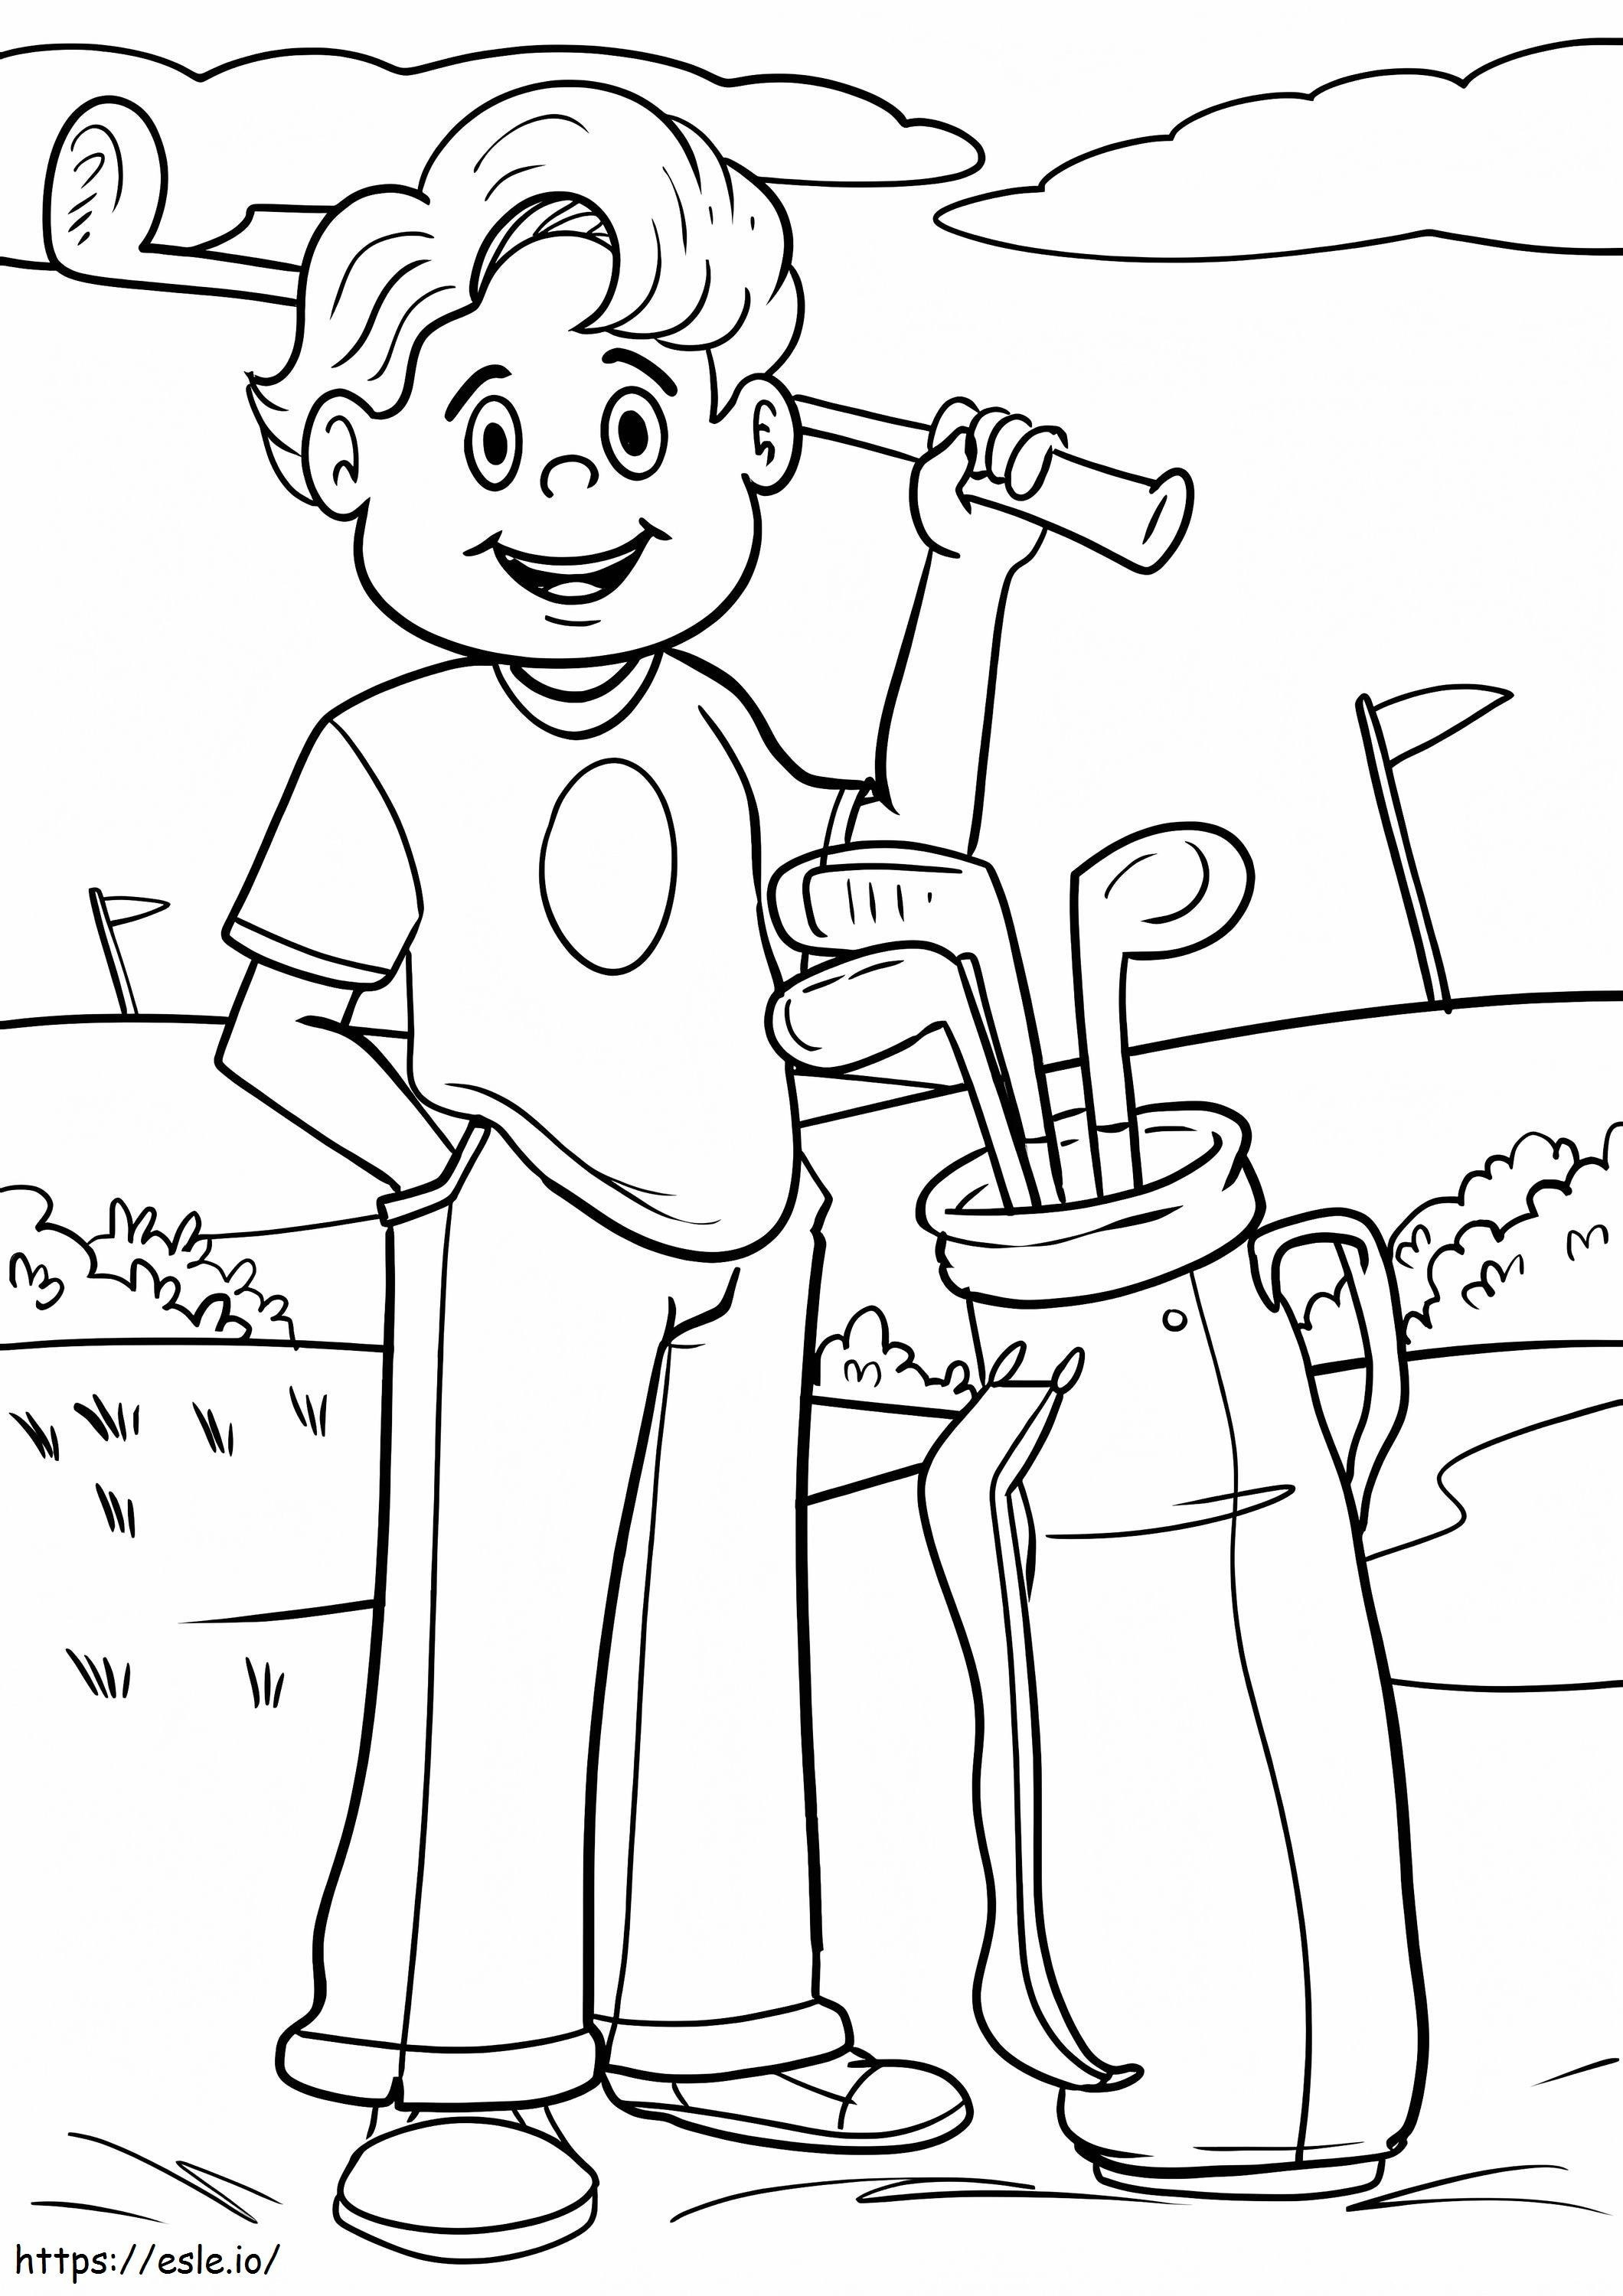 Young Guy Playing Golf coloring page